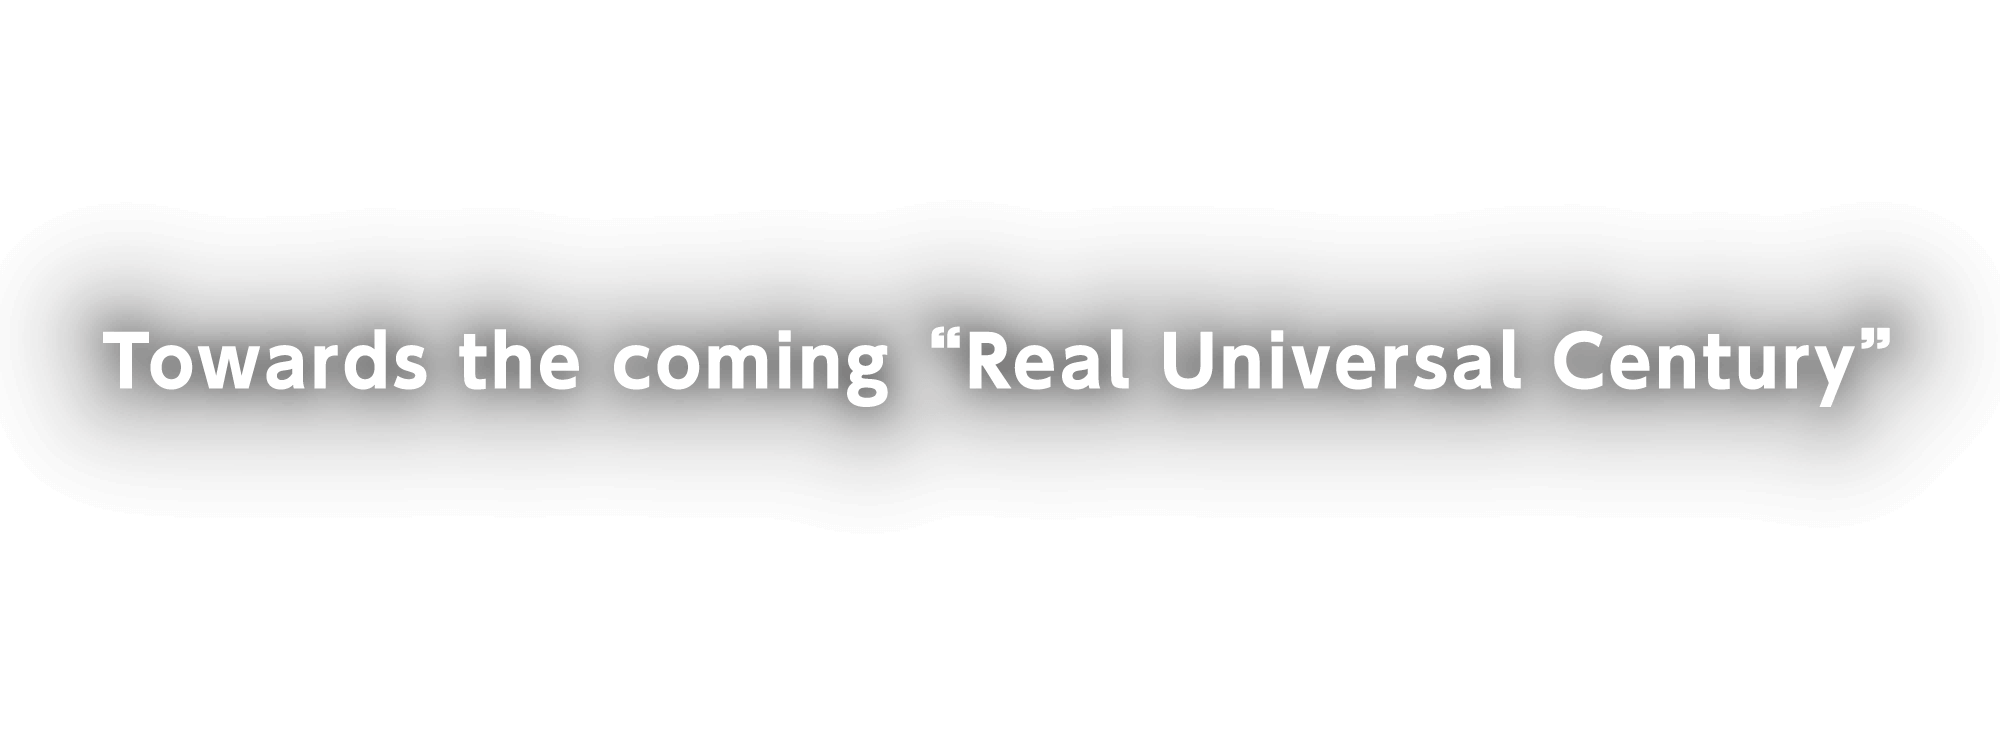 Towards the coming“Real Universal Century”